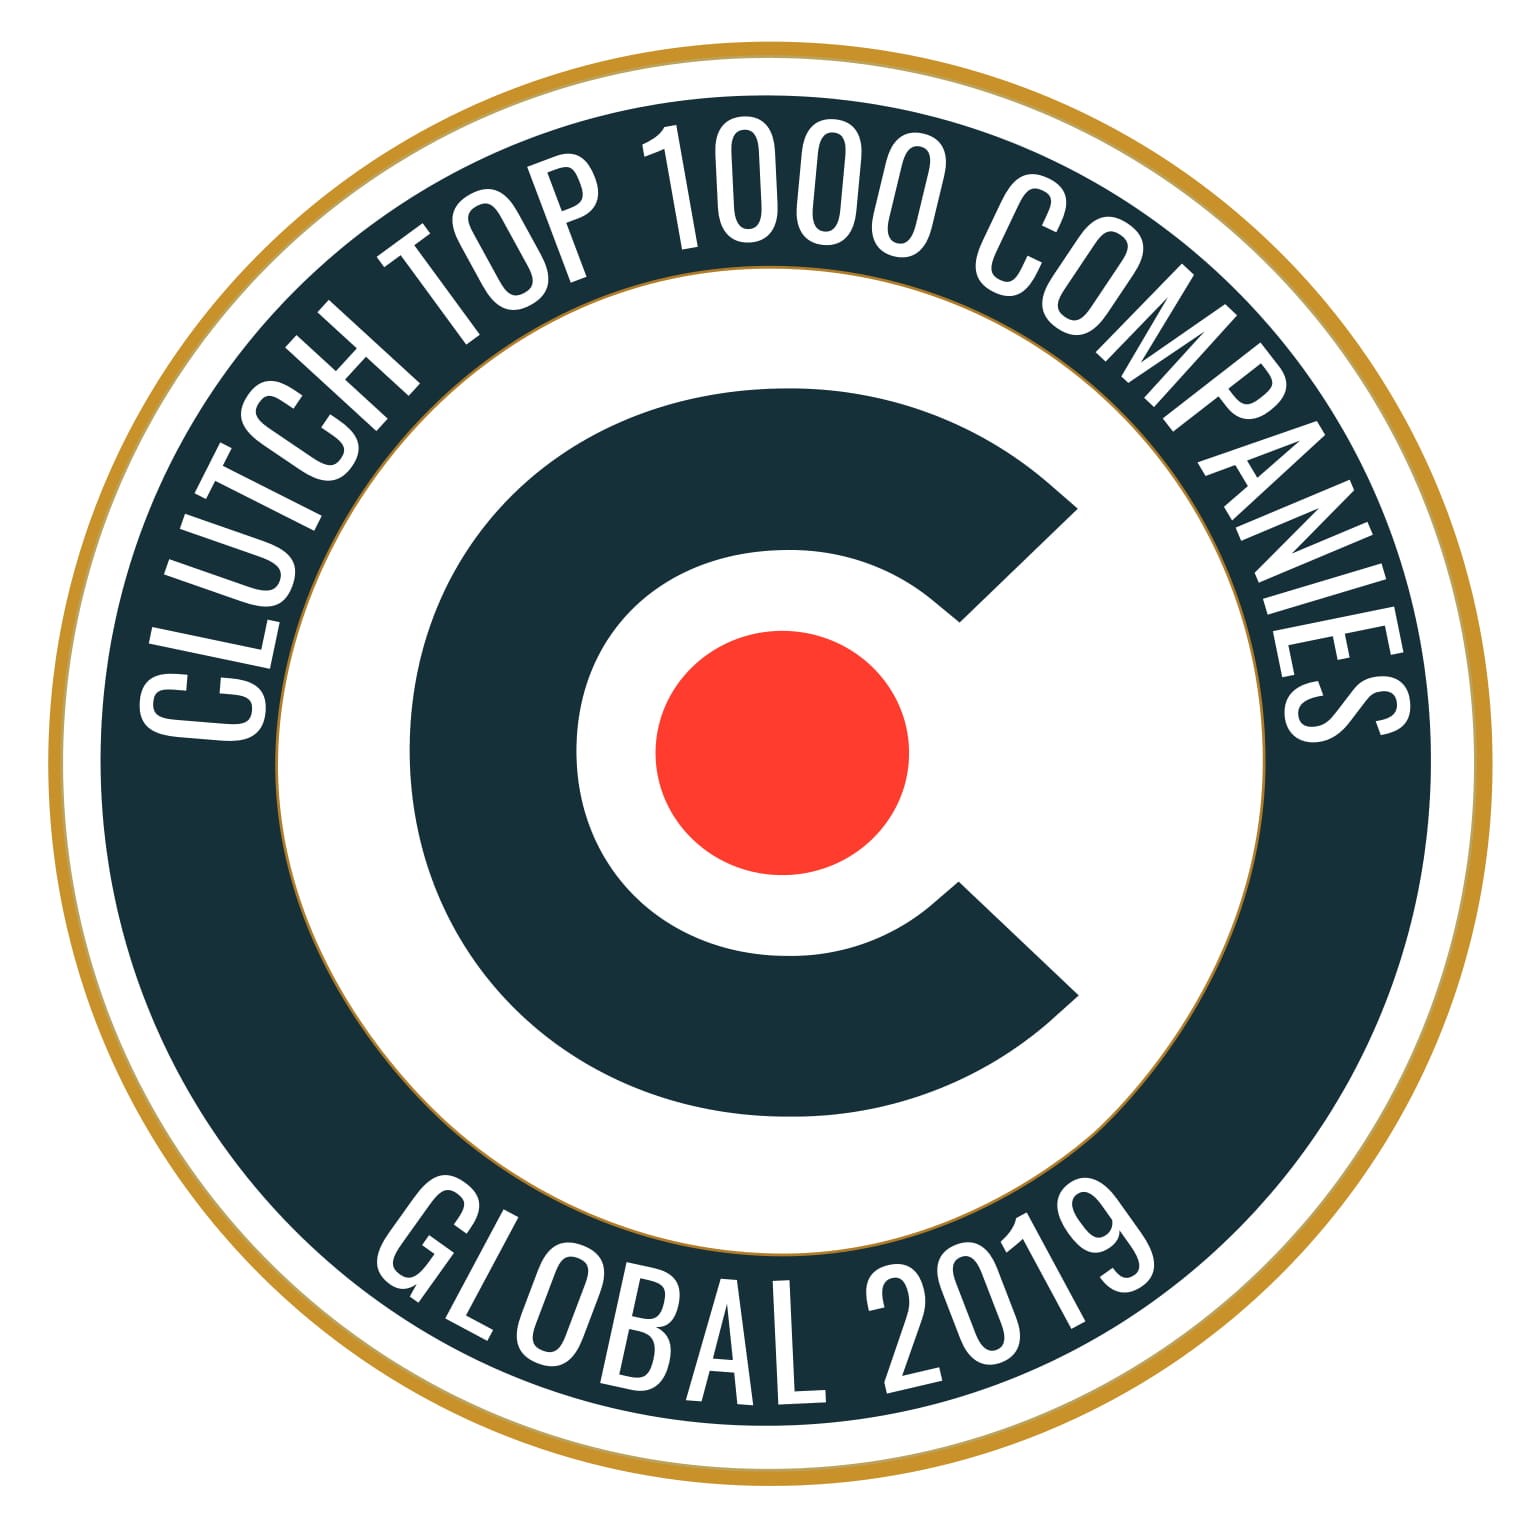 ScienceSoft Ranked on the Clutch Top 1000 Companies List